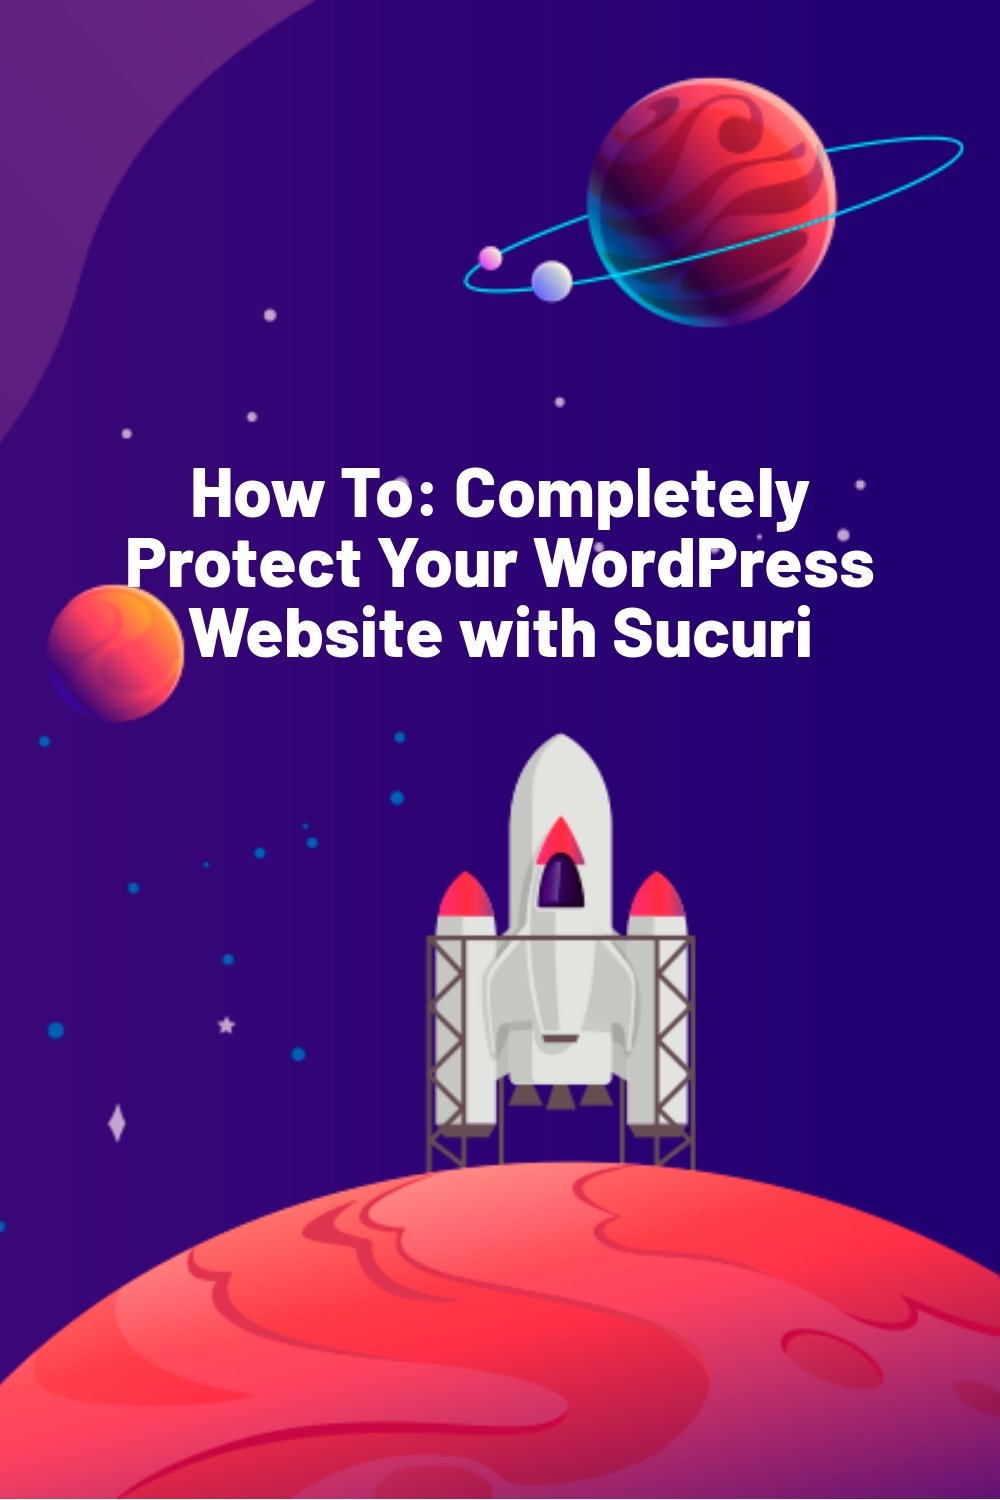 How To: Completely Protect Your WordPress Website with Sucuri